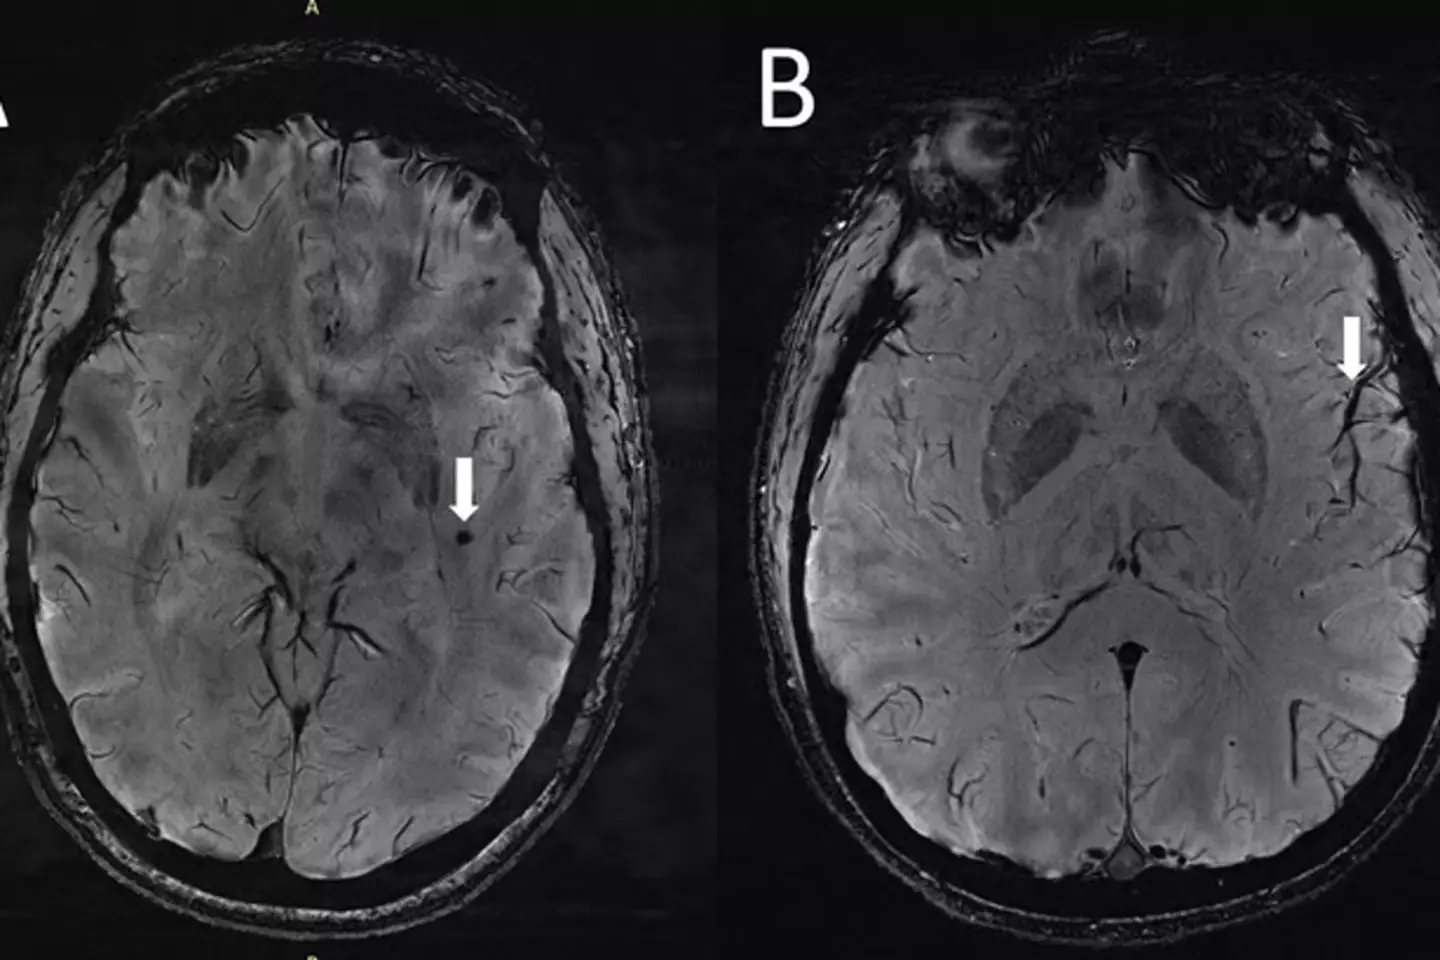 That spot on the left is a cranial microbleed, while the thing on the right is an example of an enlarged perivascular space.